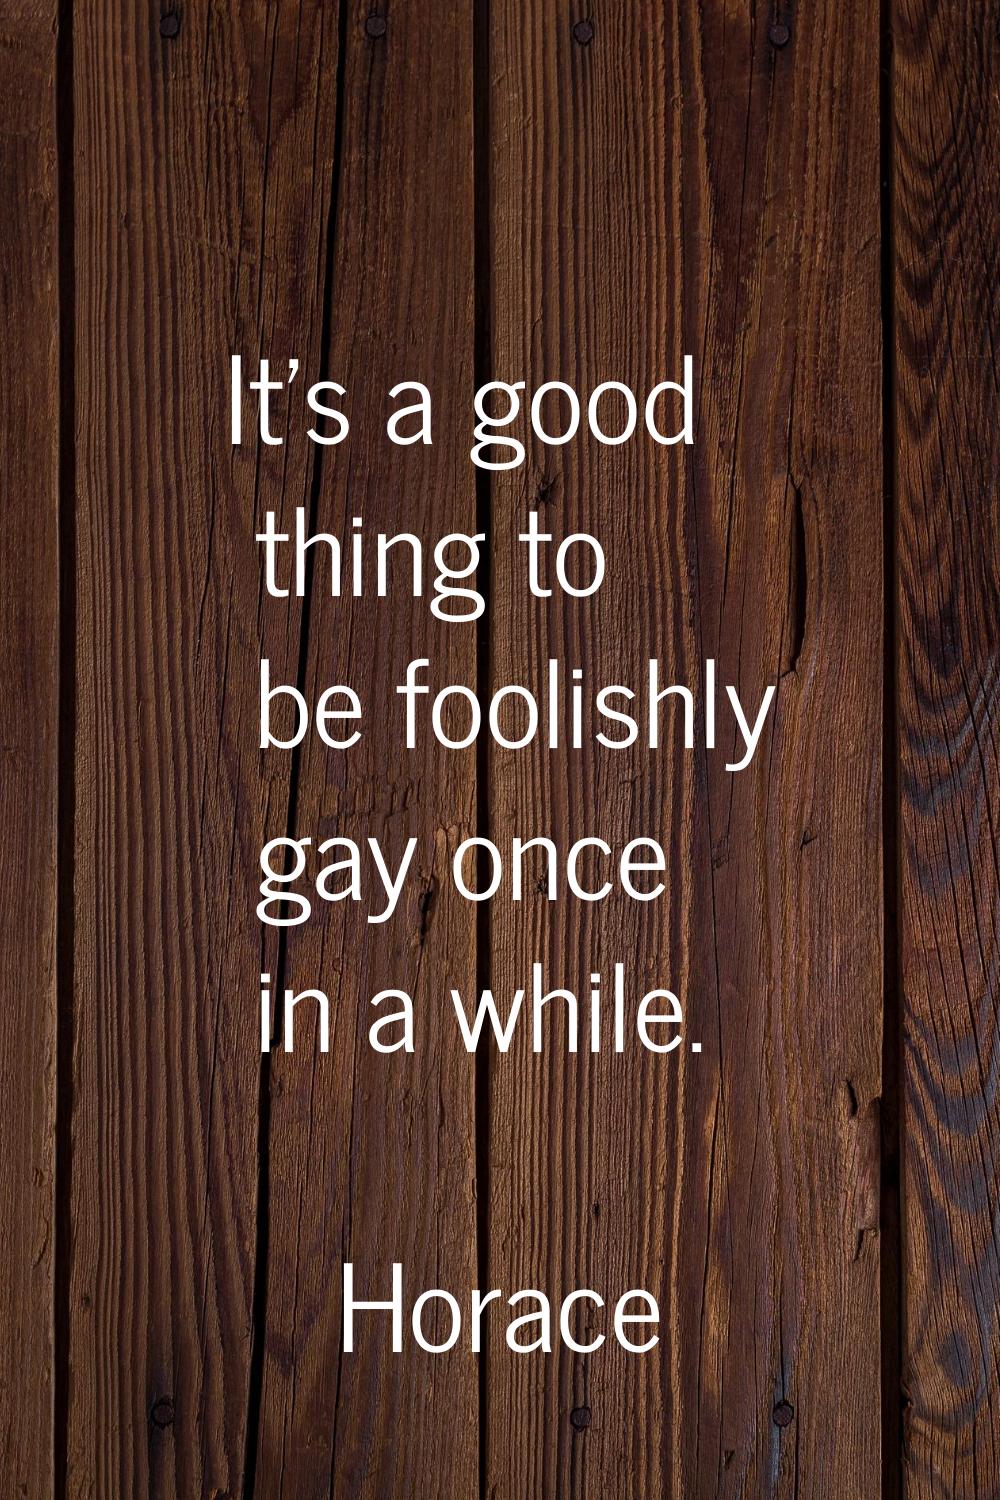 It's a good thing to be foolishly gay once in a while.